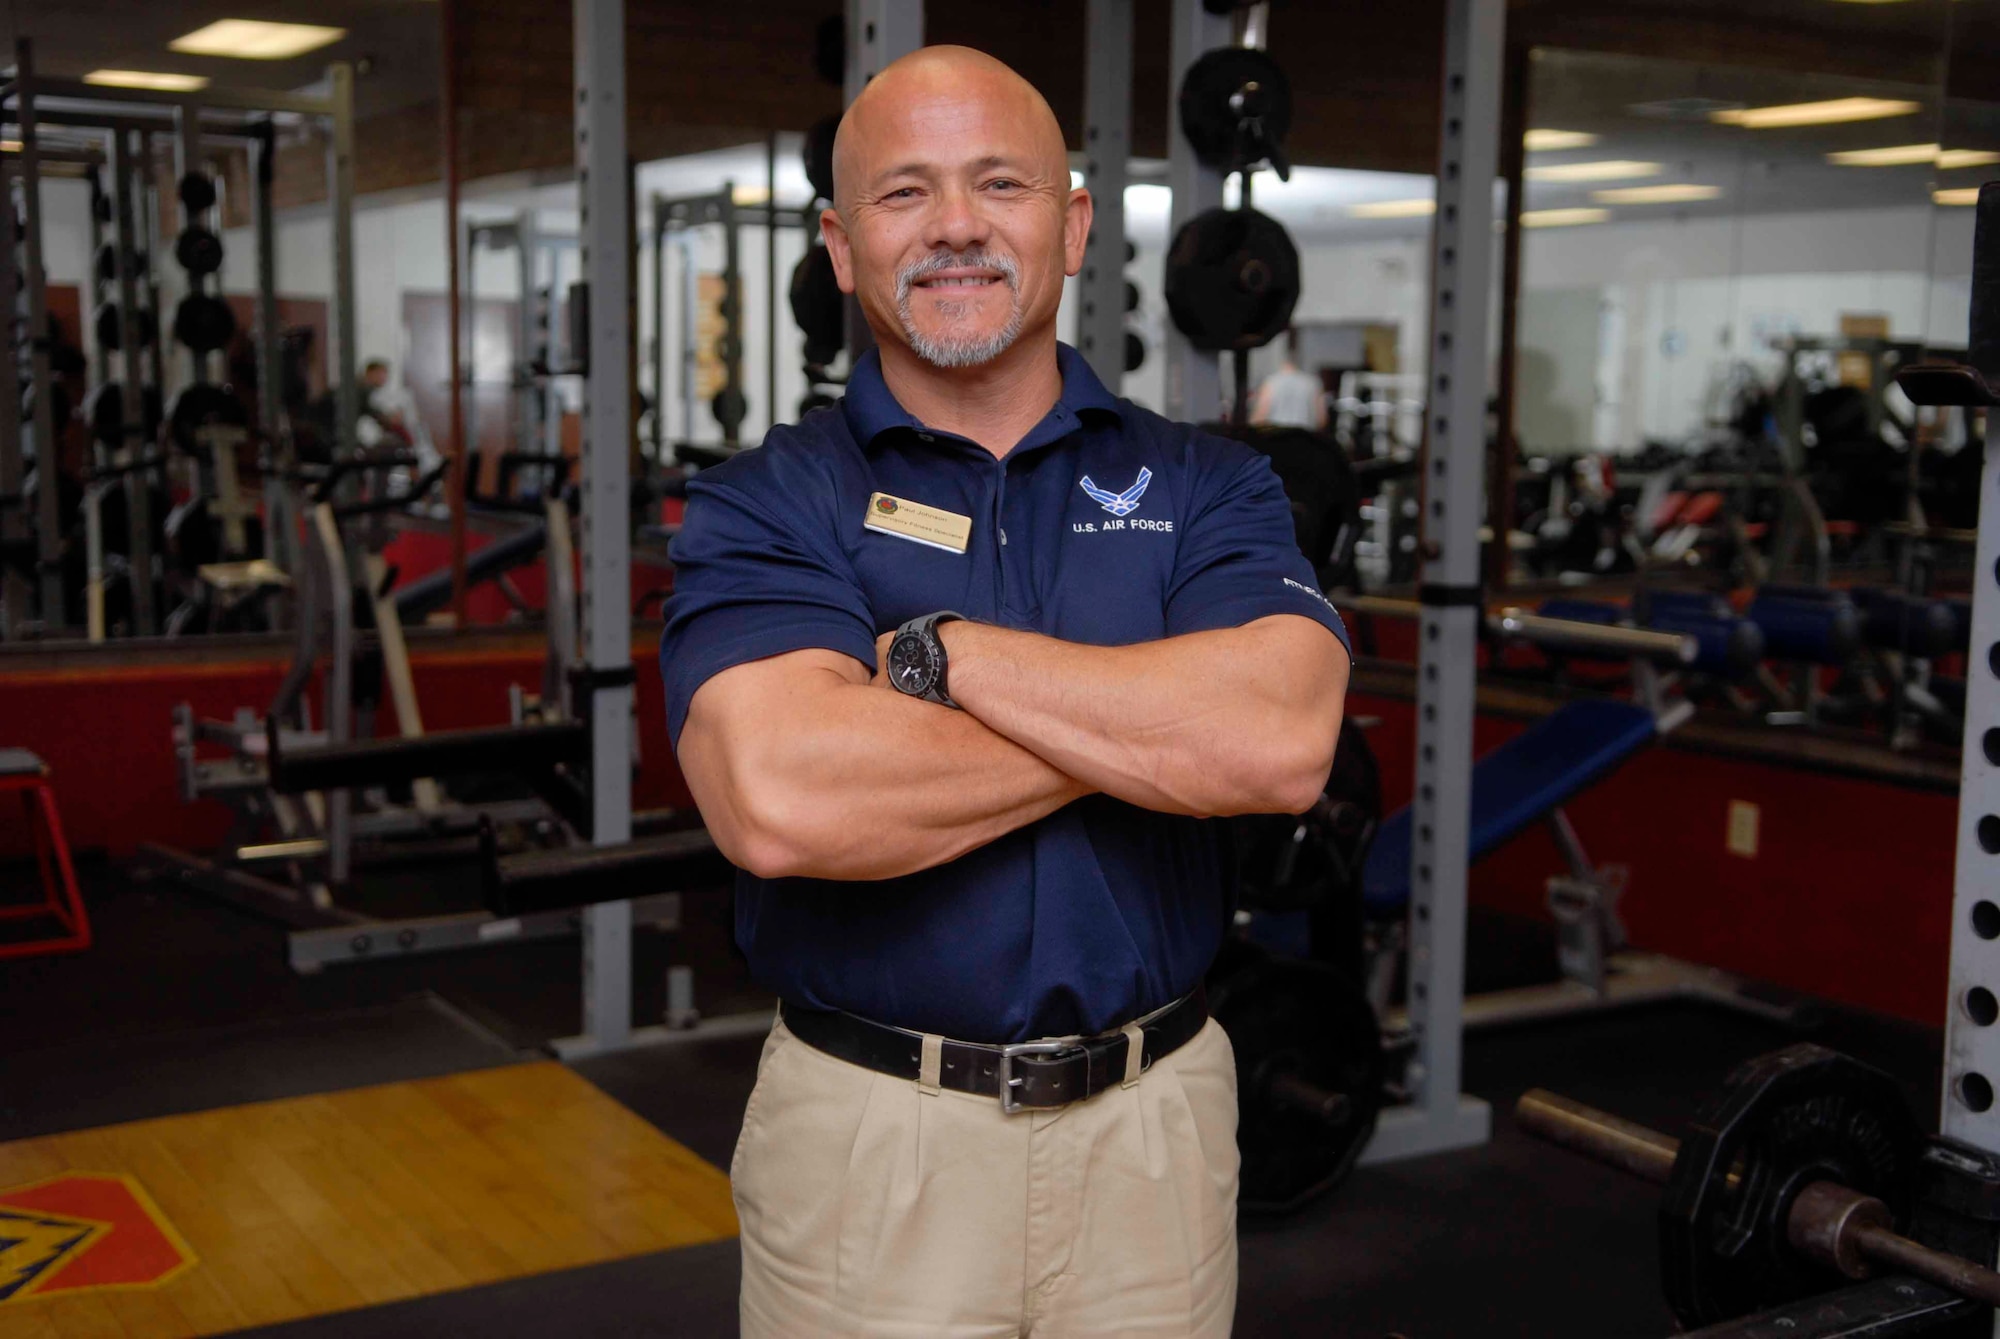 Paul Johnson, 56th Force Support Squadron Bryant Fitness Center fitness specialist supervisor, poses for a photo Aug. 21 in the weight room at the Luke Air Force Base Bryant Fitness Center. Johnson is a survivor of multiple accidents, one of which changed his life forever, spurring him to become a personal trainer. 